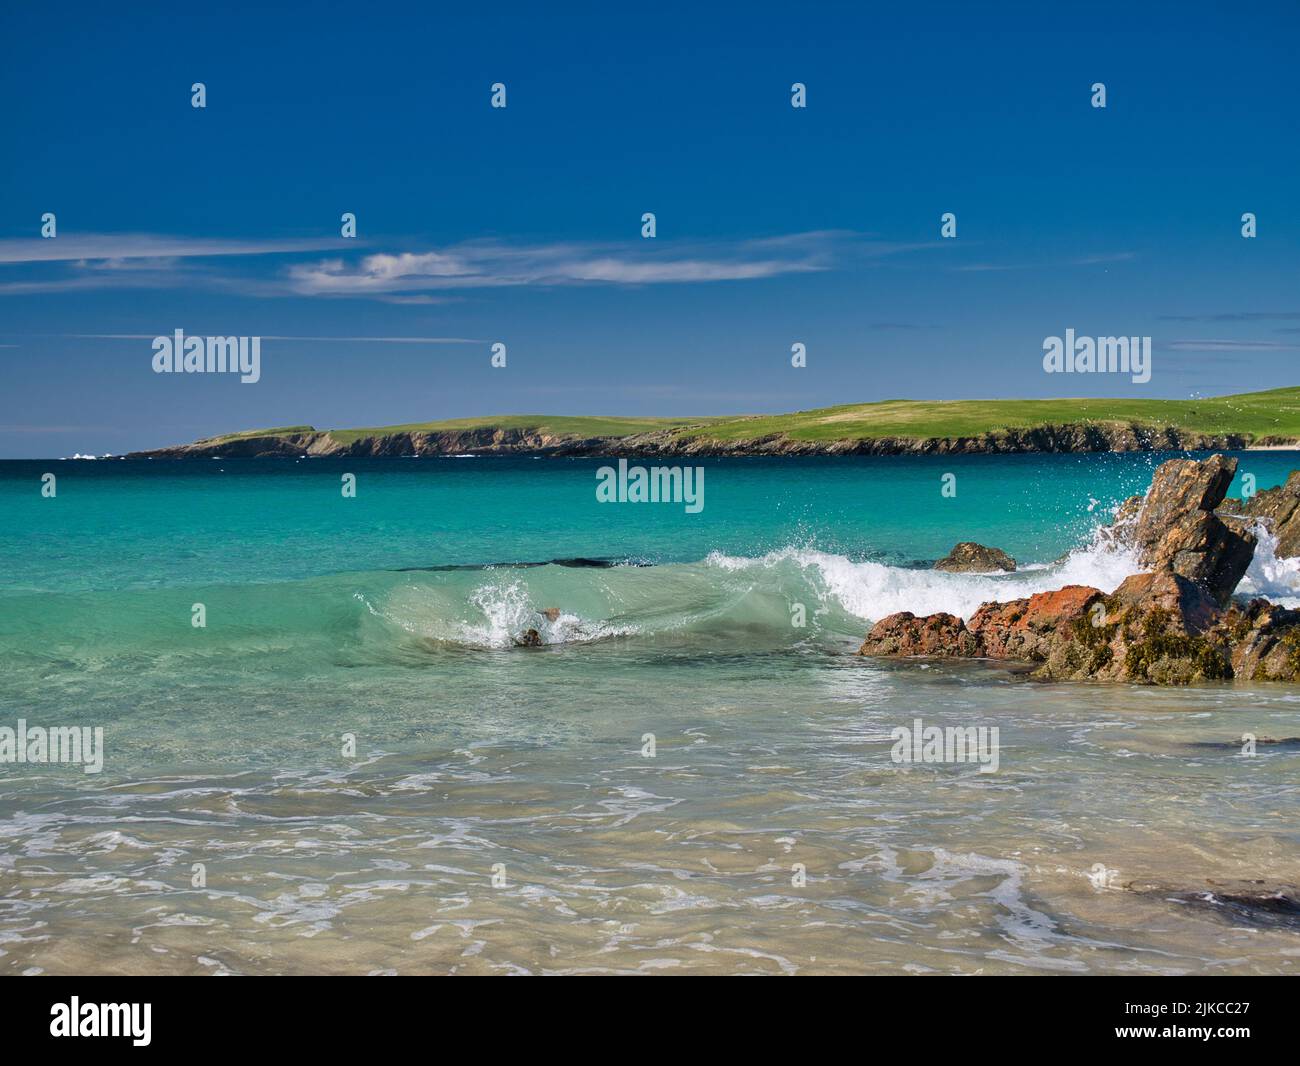 Waves break in the clear turquoise water on a beach near Scousburgh in southern Shetland, UK. Taken on a sunny day with a blue sky. Stock Photo